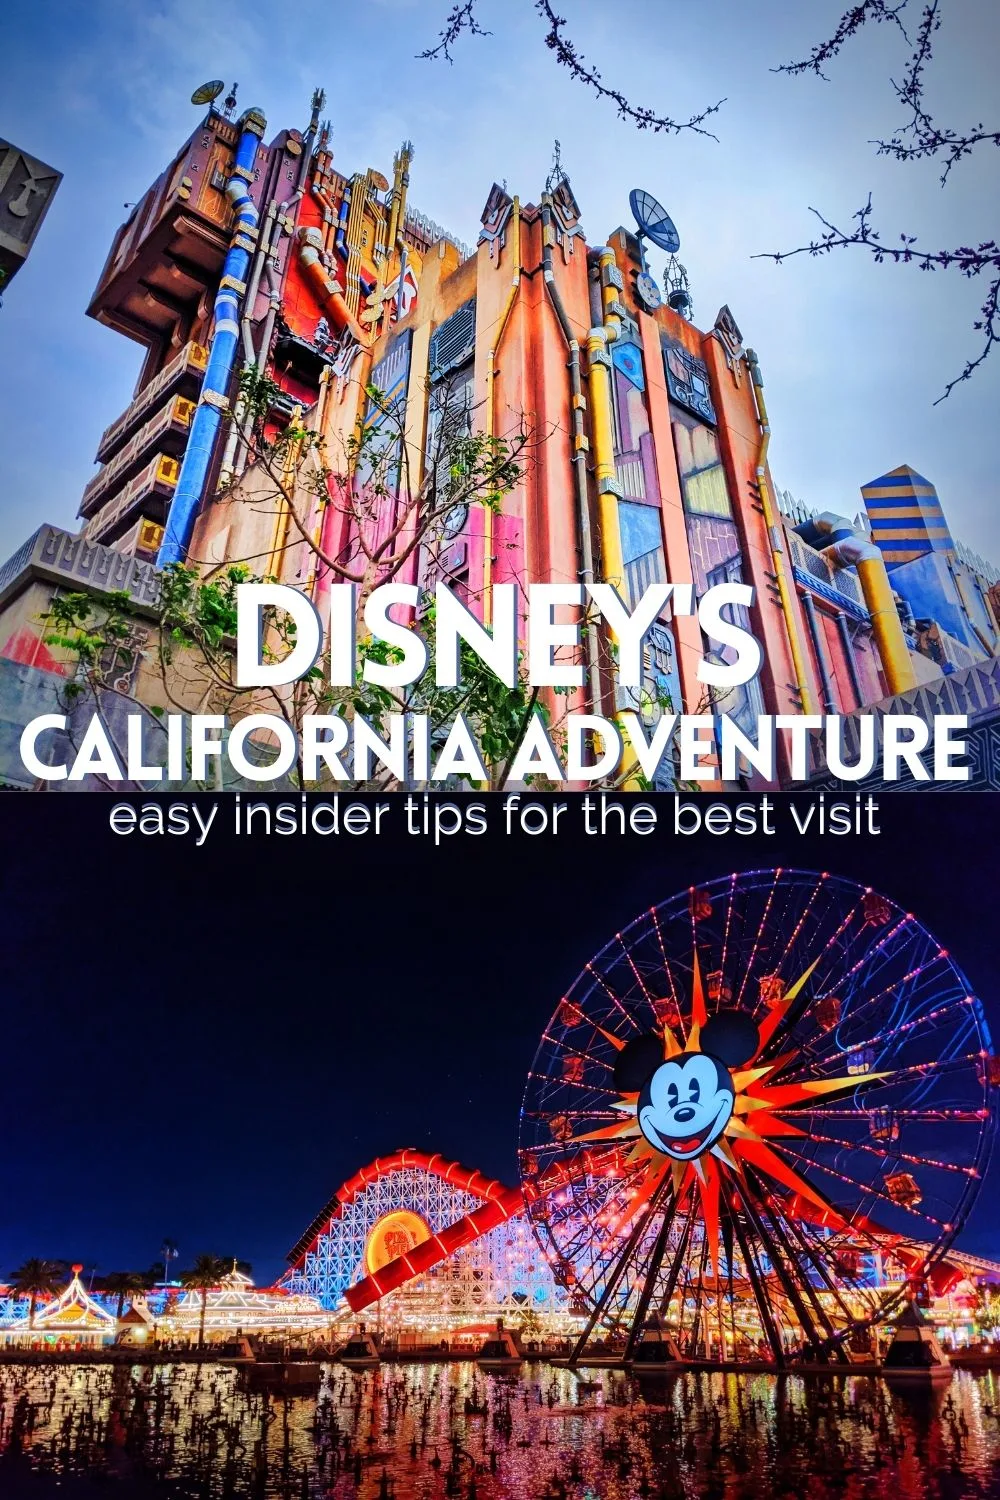 Disney's California Adventure park is always a surprise and delight. Guide to everything DCA for 2020/2021 including what to expect with Marvel Avengers Campus. Awesome SoCal family fun!